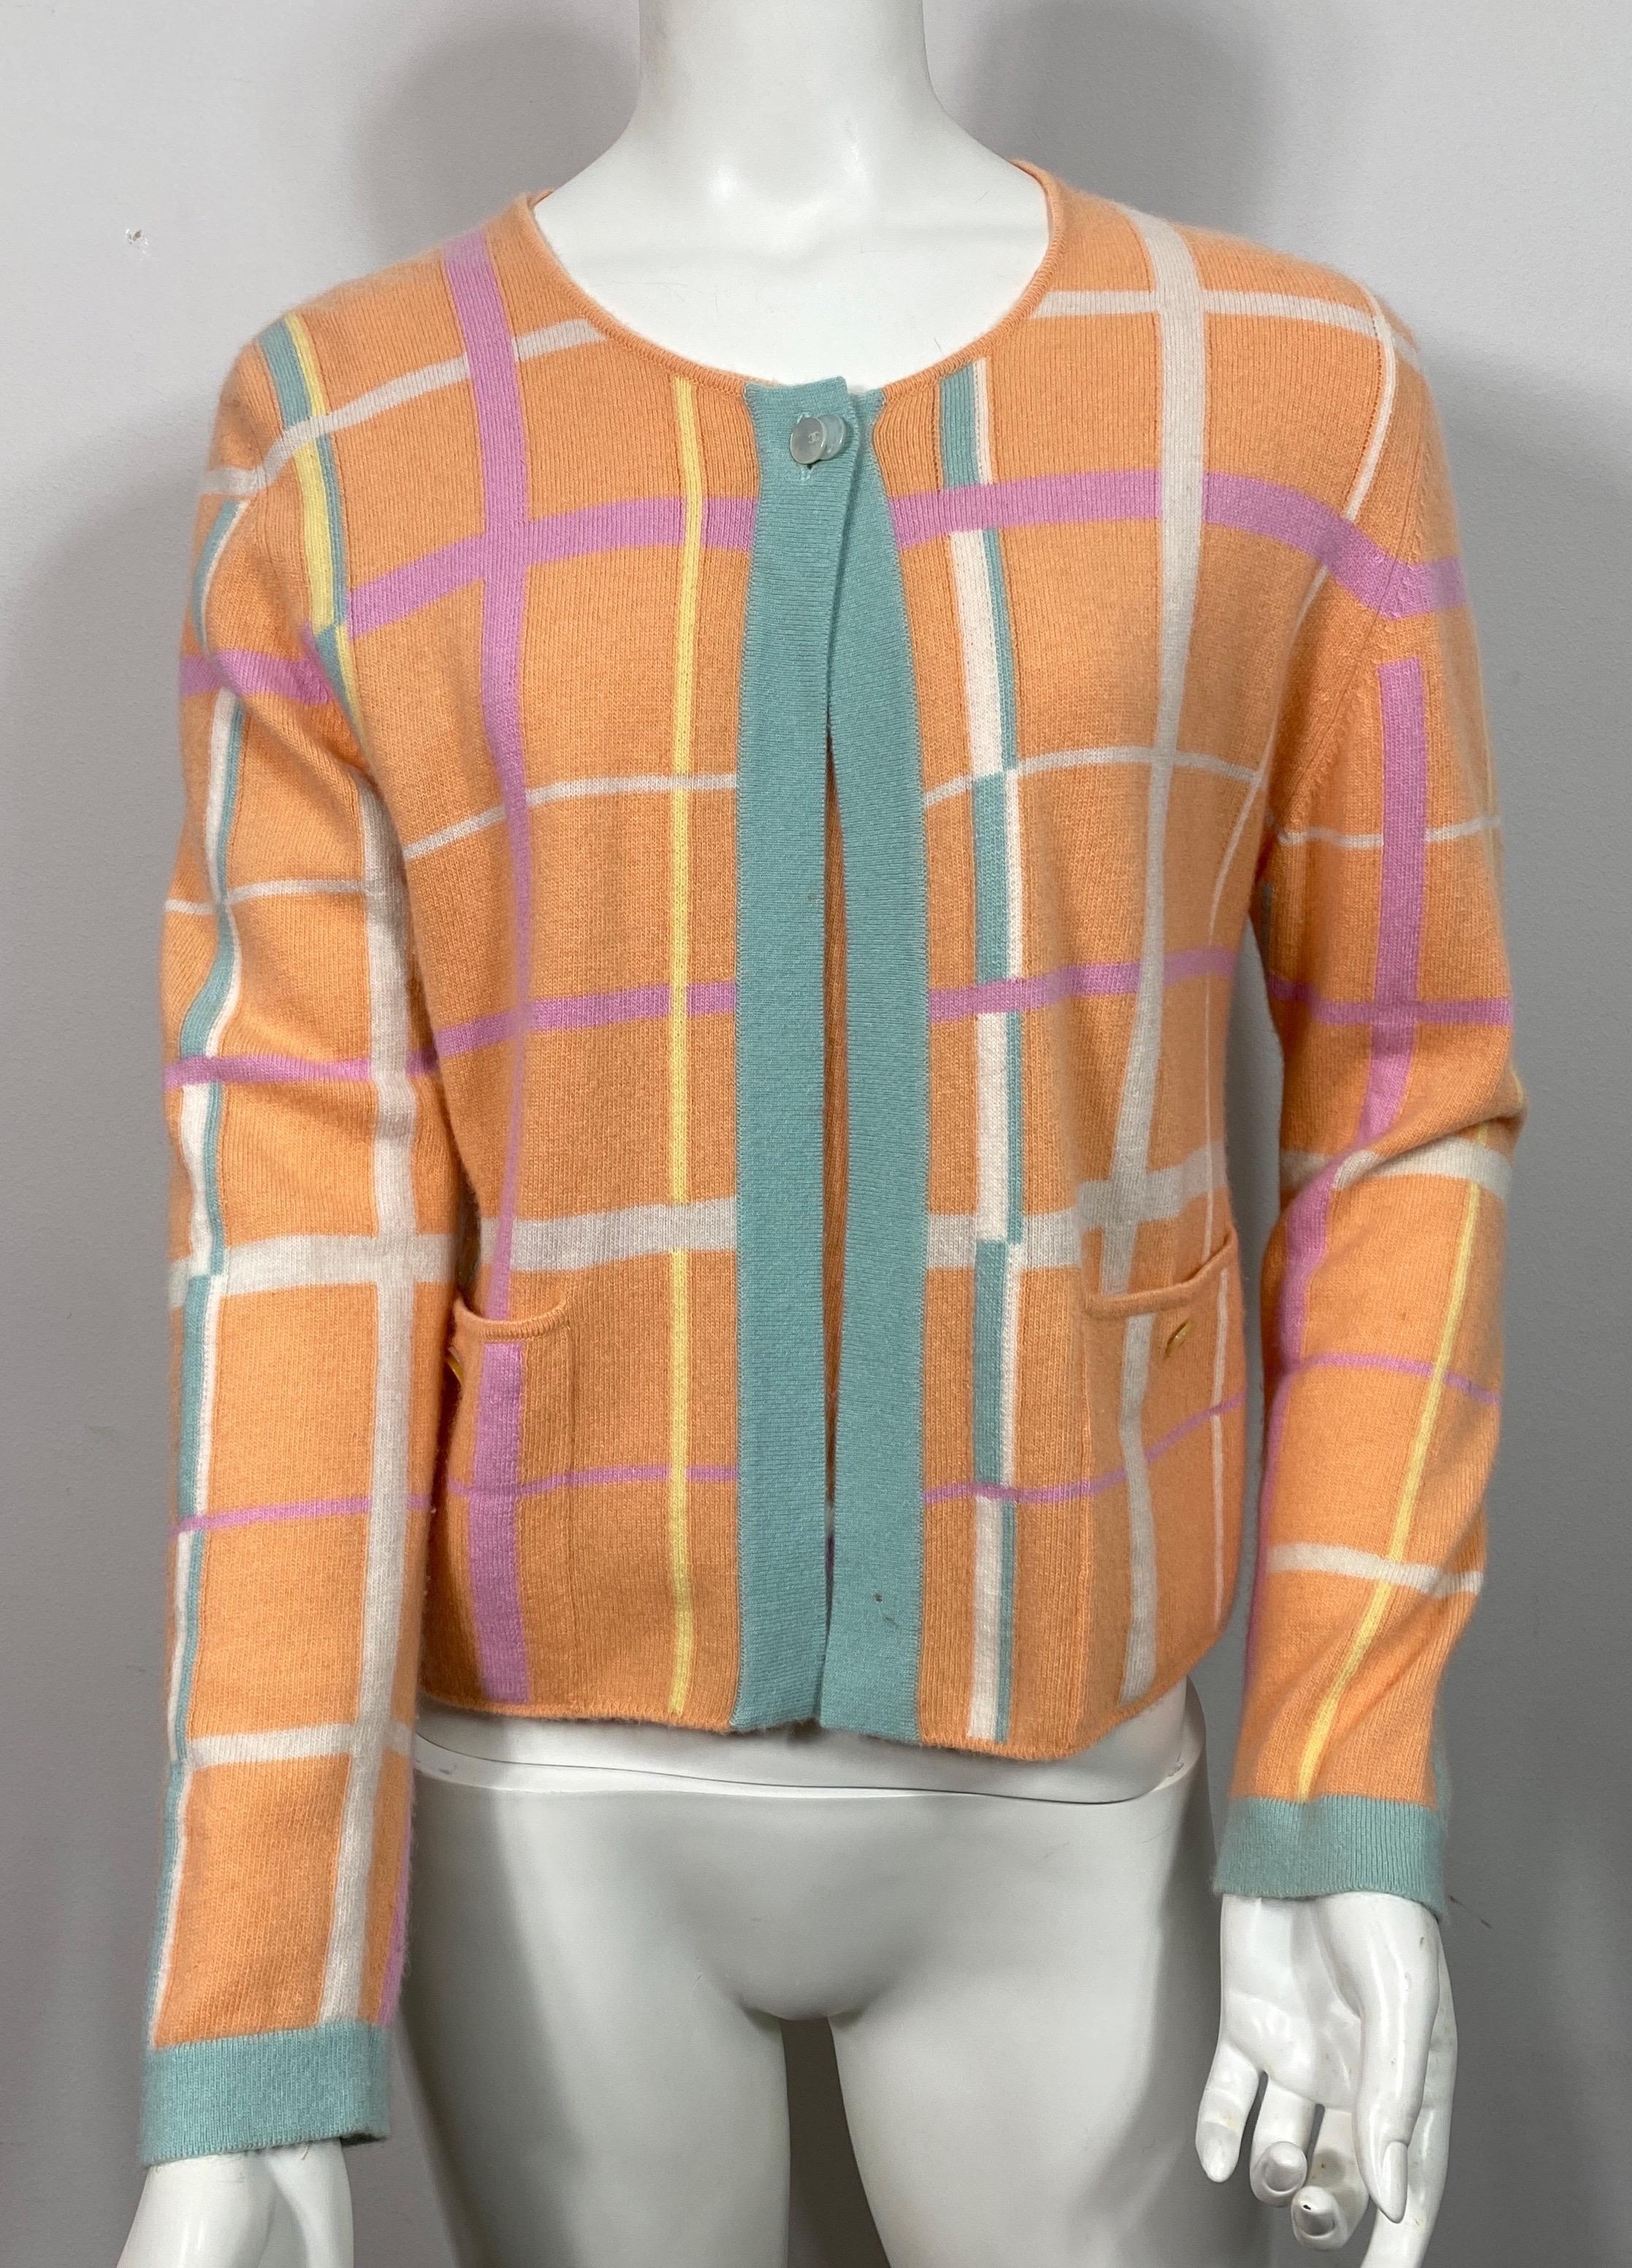 Chanel 1999 Cruise Collection Melon and Pastel Cashmere Sweater Set-Size 42. This soft cashmere sweater set comes from a runway collection from the 1999 Cruise season. The cardigan is primarily a soft melon color with a window pane design in teal,